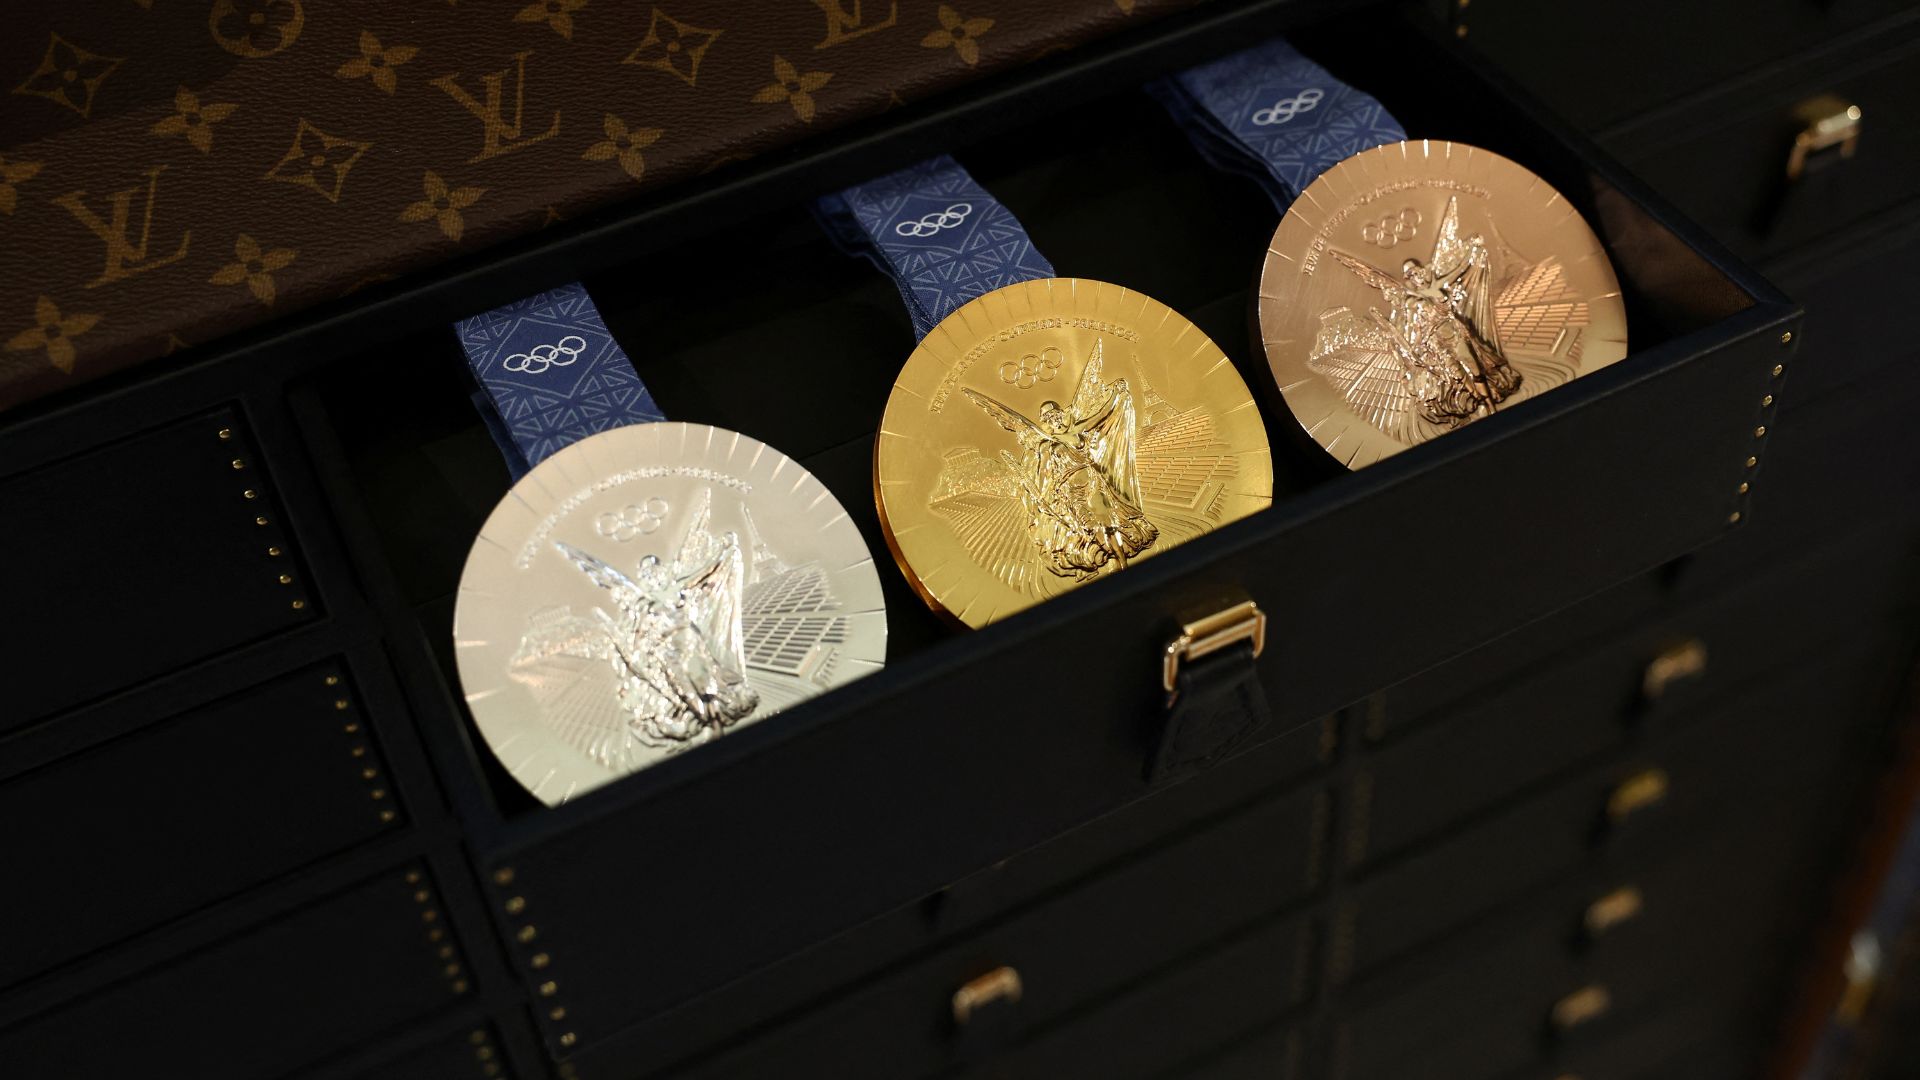 Olympics gold, silver and bronze medals in a Louis Vuitton trunk, which will transport and protect them during the Paris 2024 Olympic and Paralympic Games. /Stephanie Lecocq/Reuters